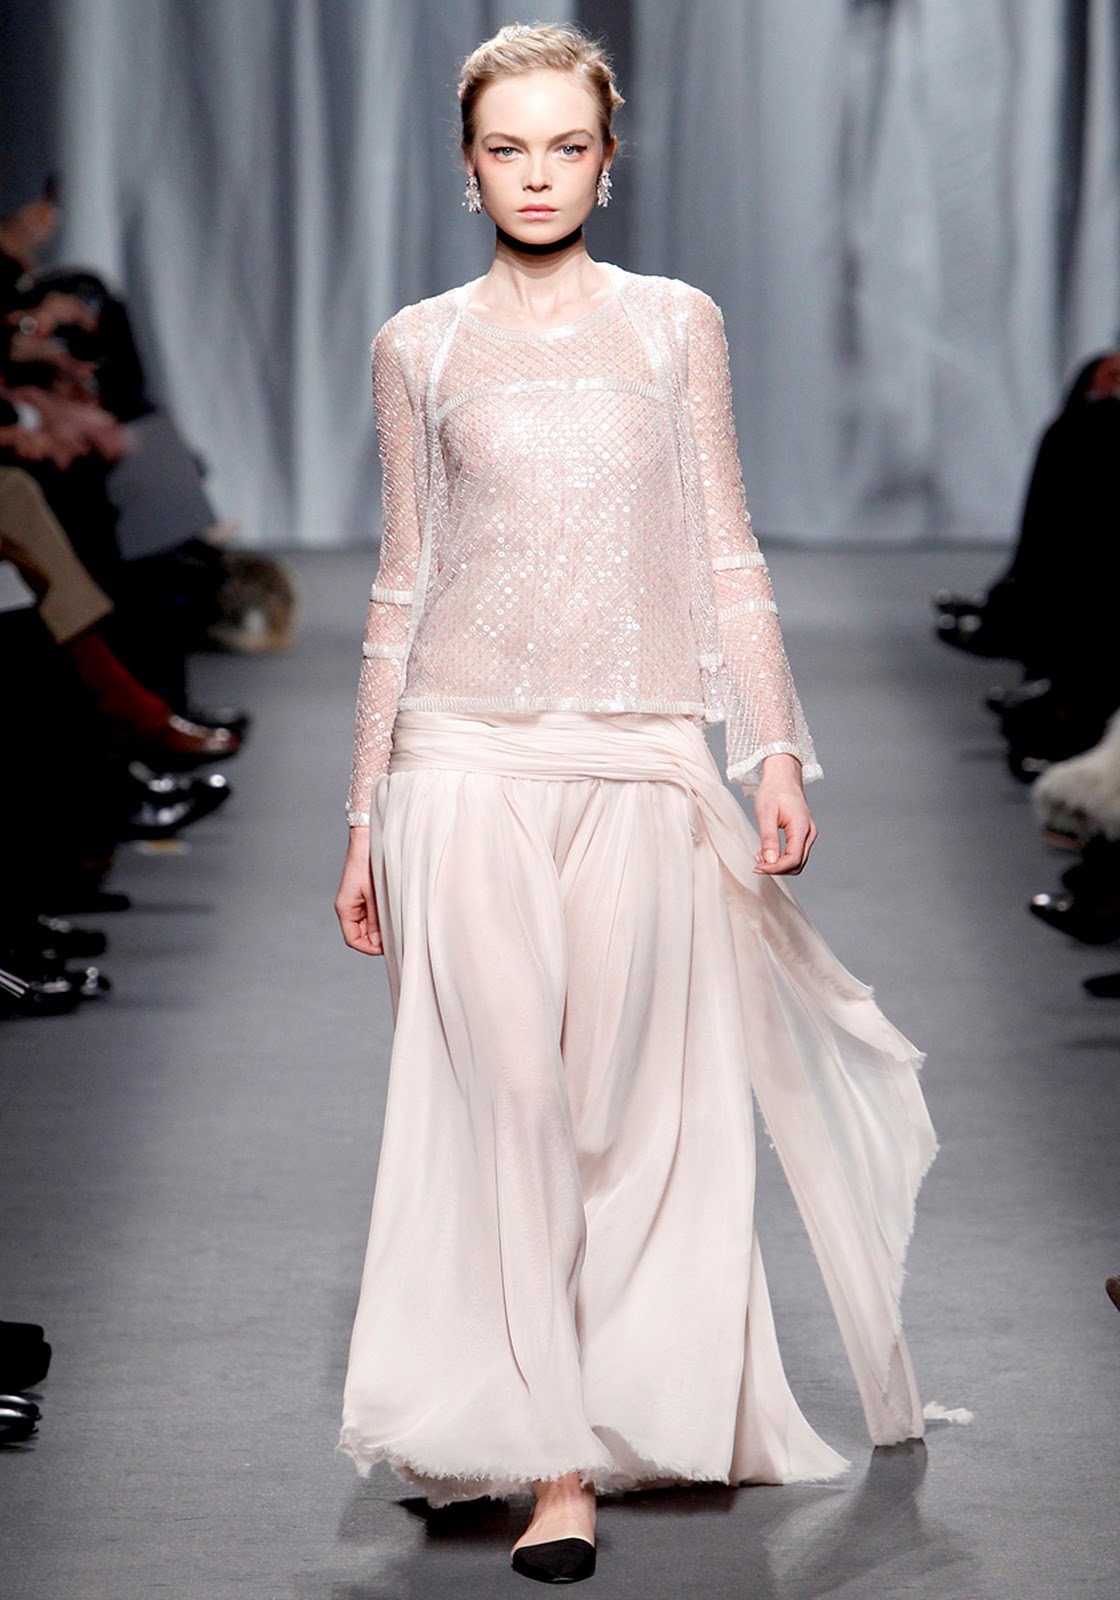 Runway, Chanel Spring-Summer 2011 Haute Couture